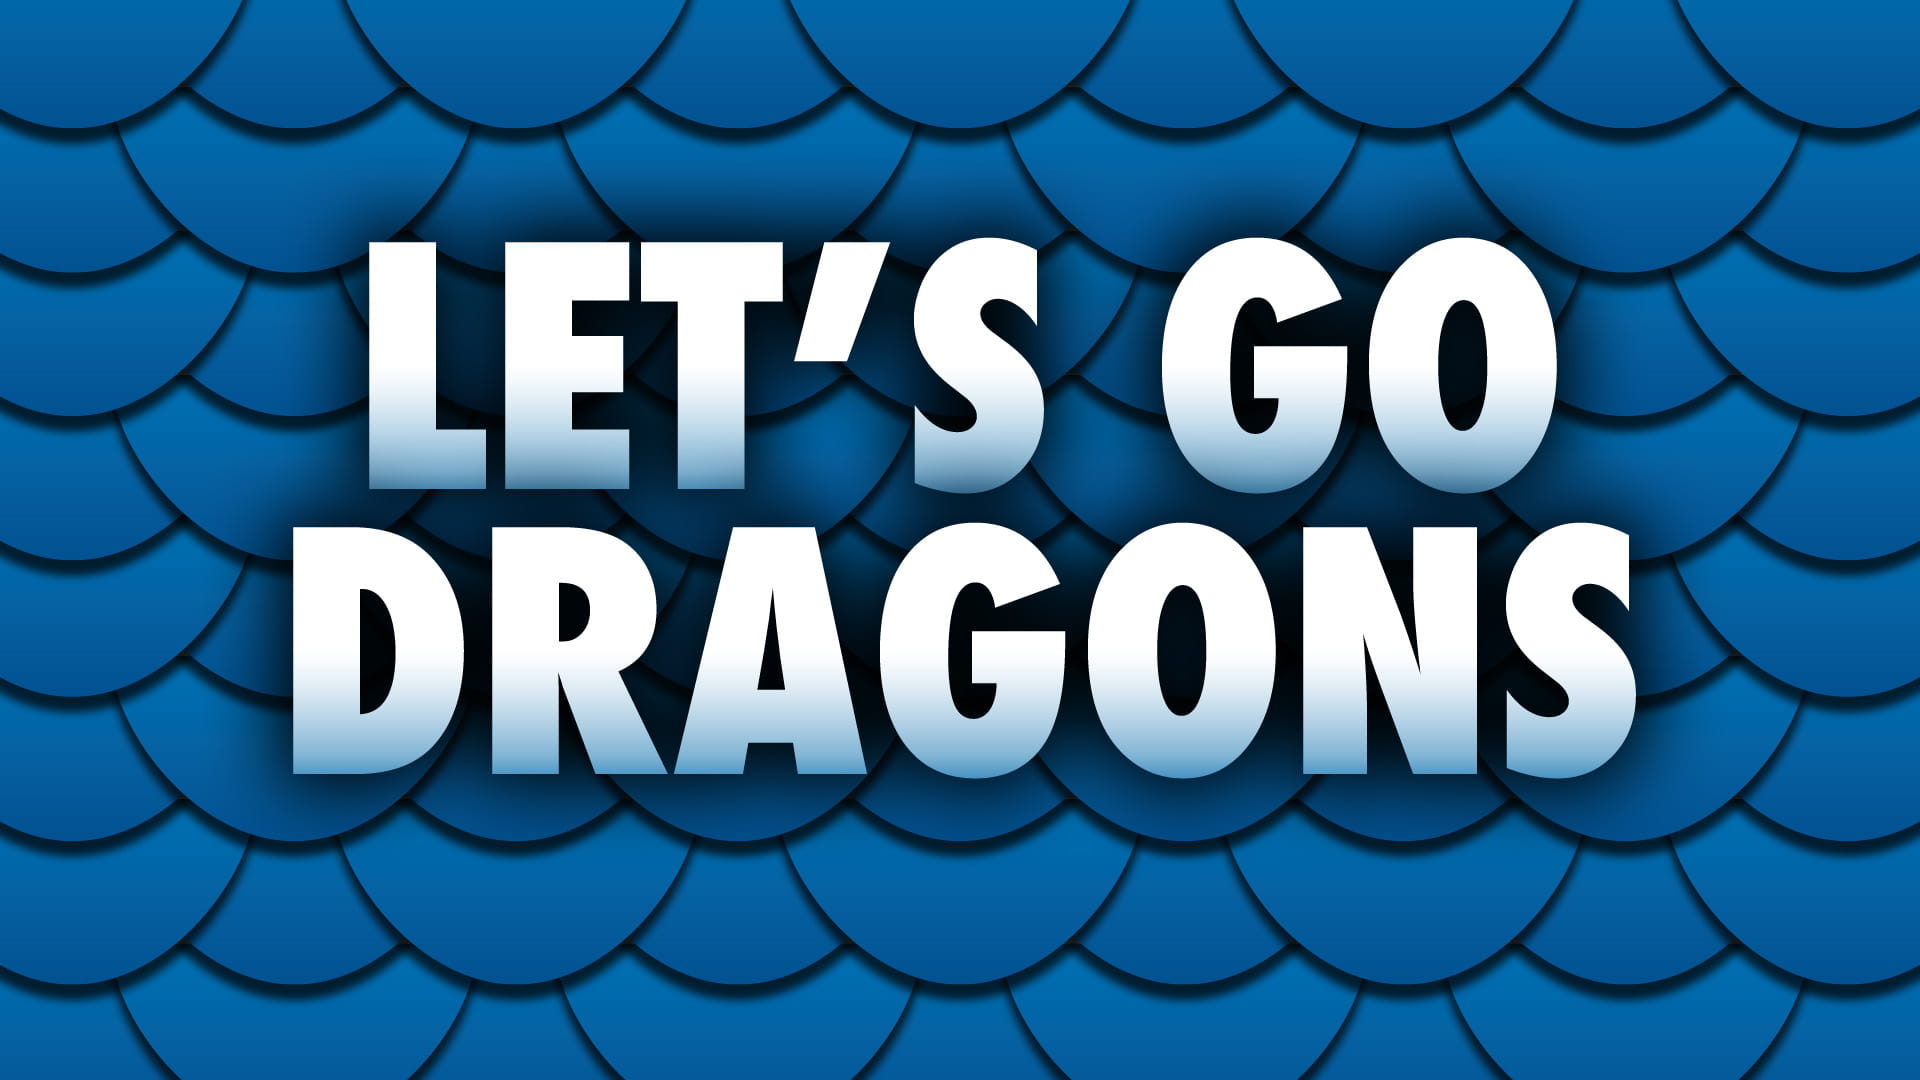 Dragon scales graphical design with 'Let's Go Dragons.'